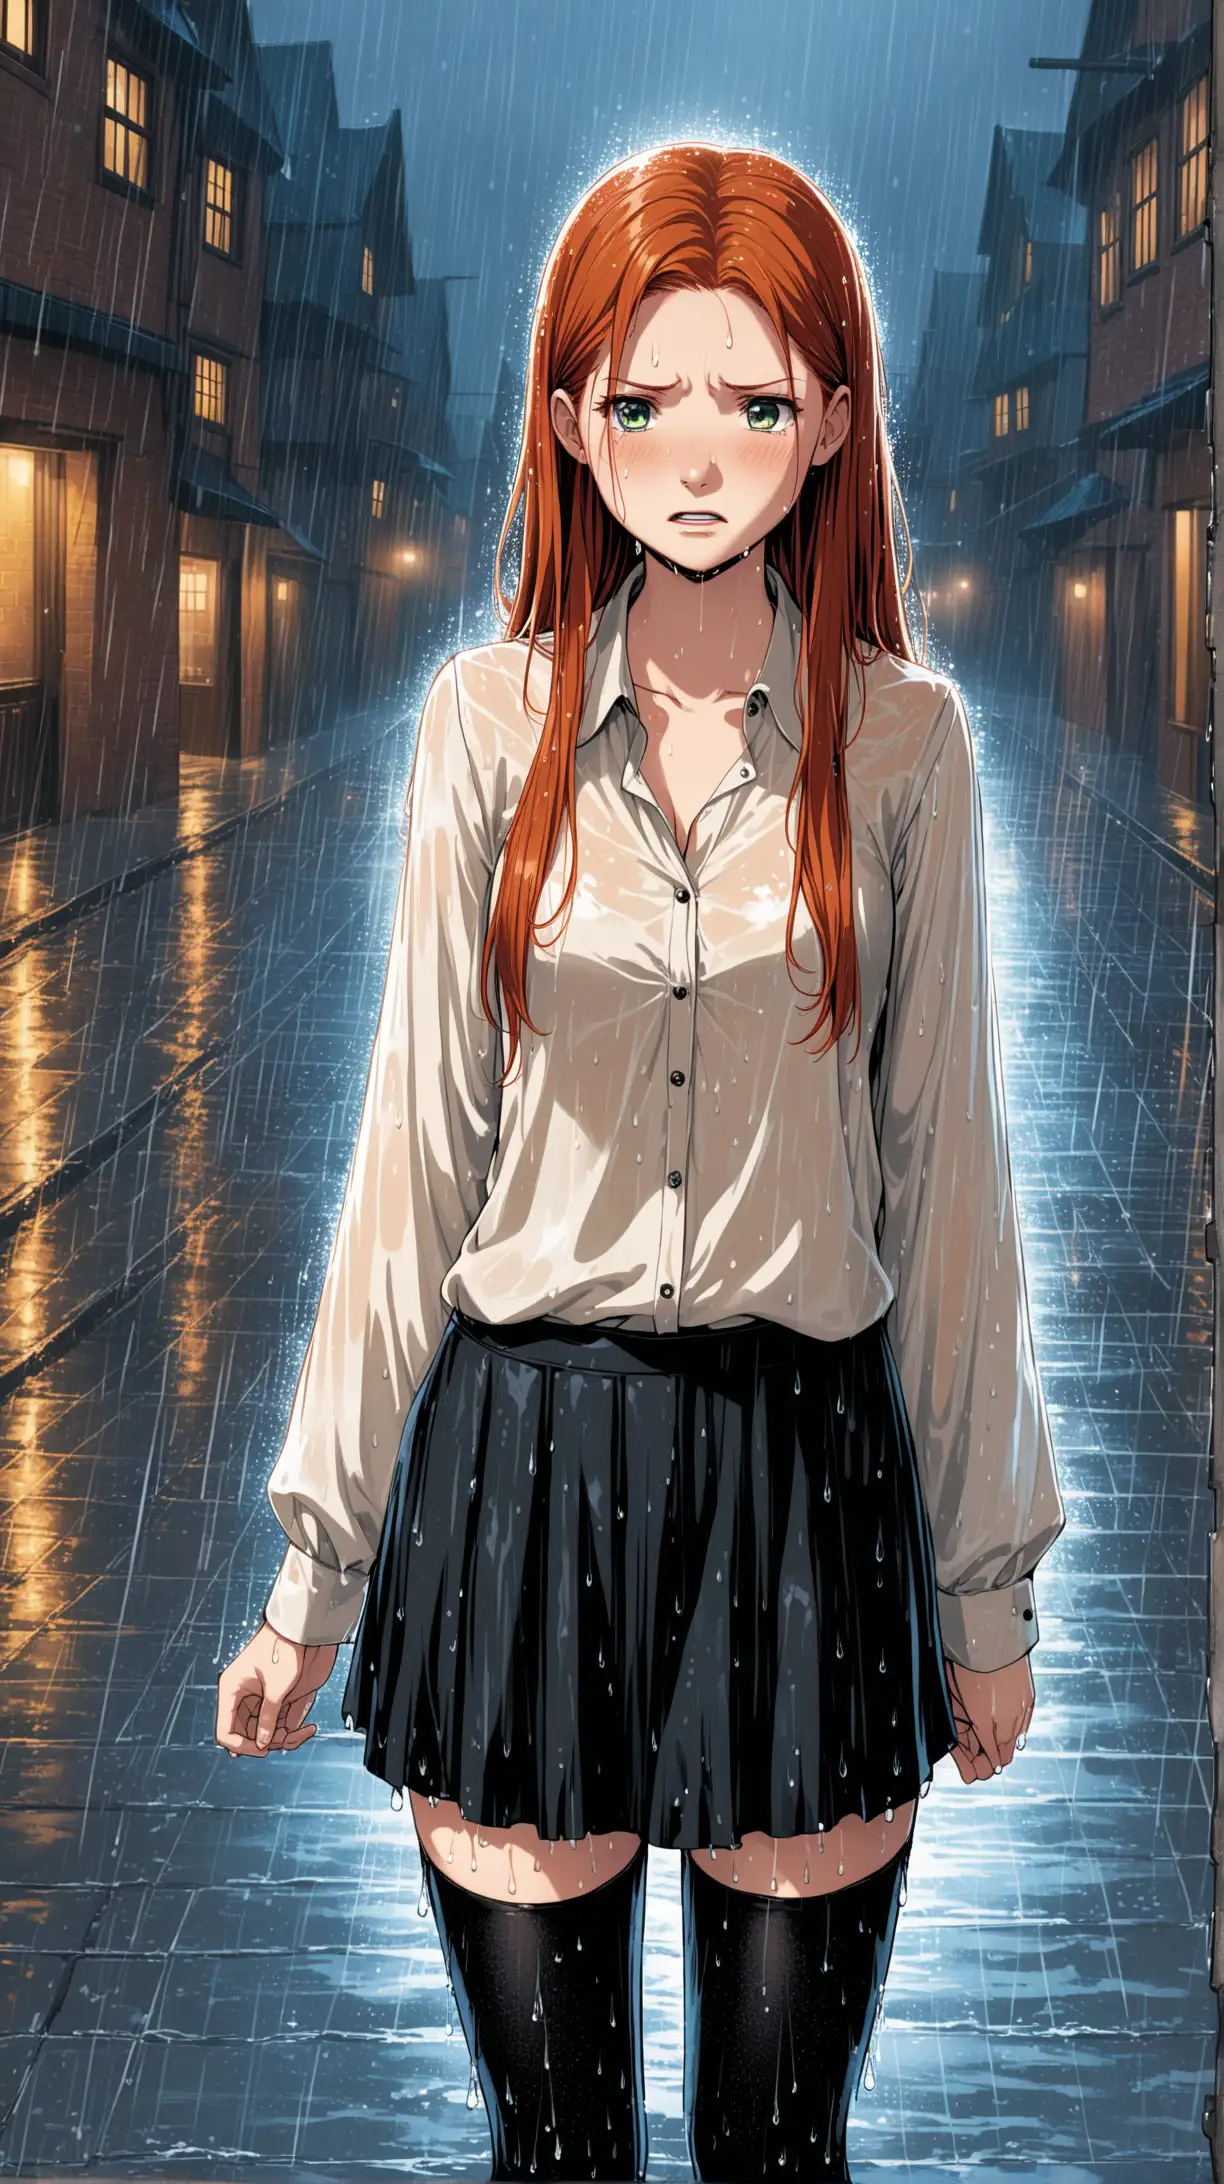 Ginny Weasley Standing in the Rain Portrait of Emotion and Resilience